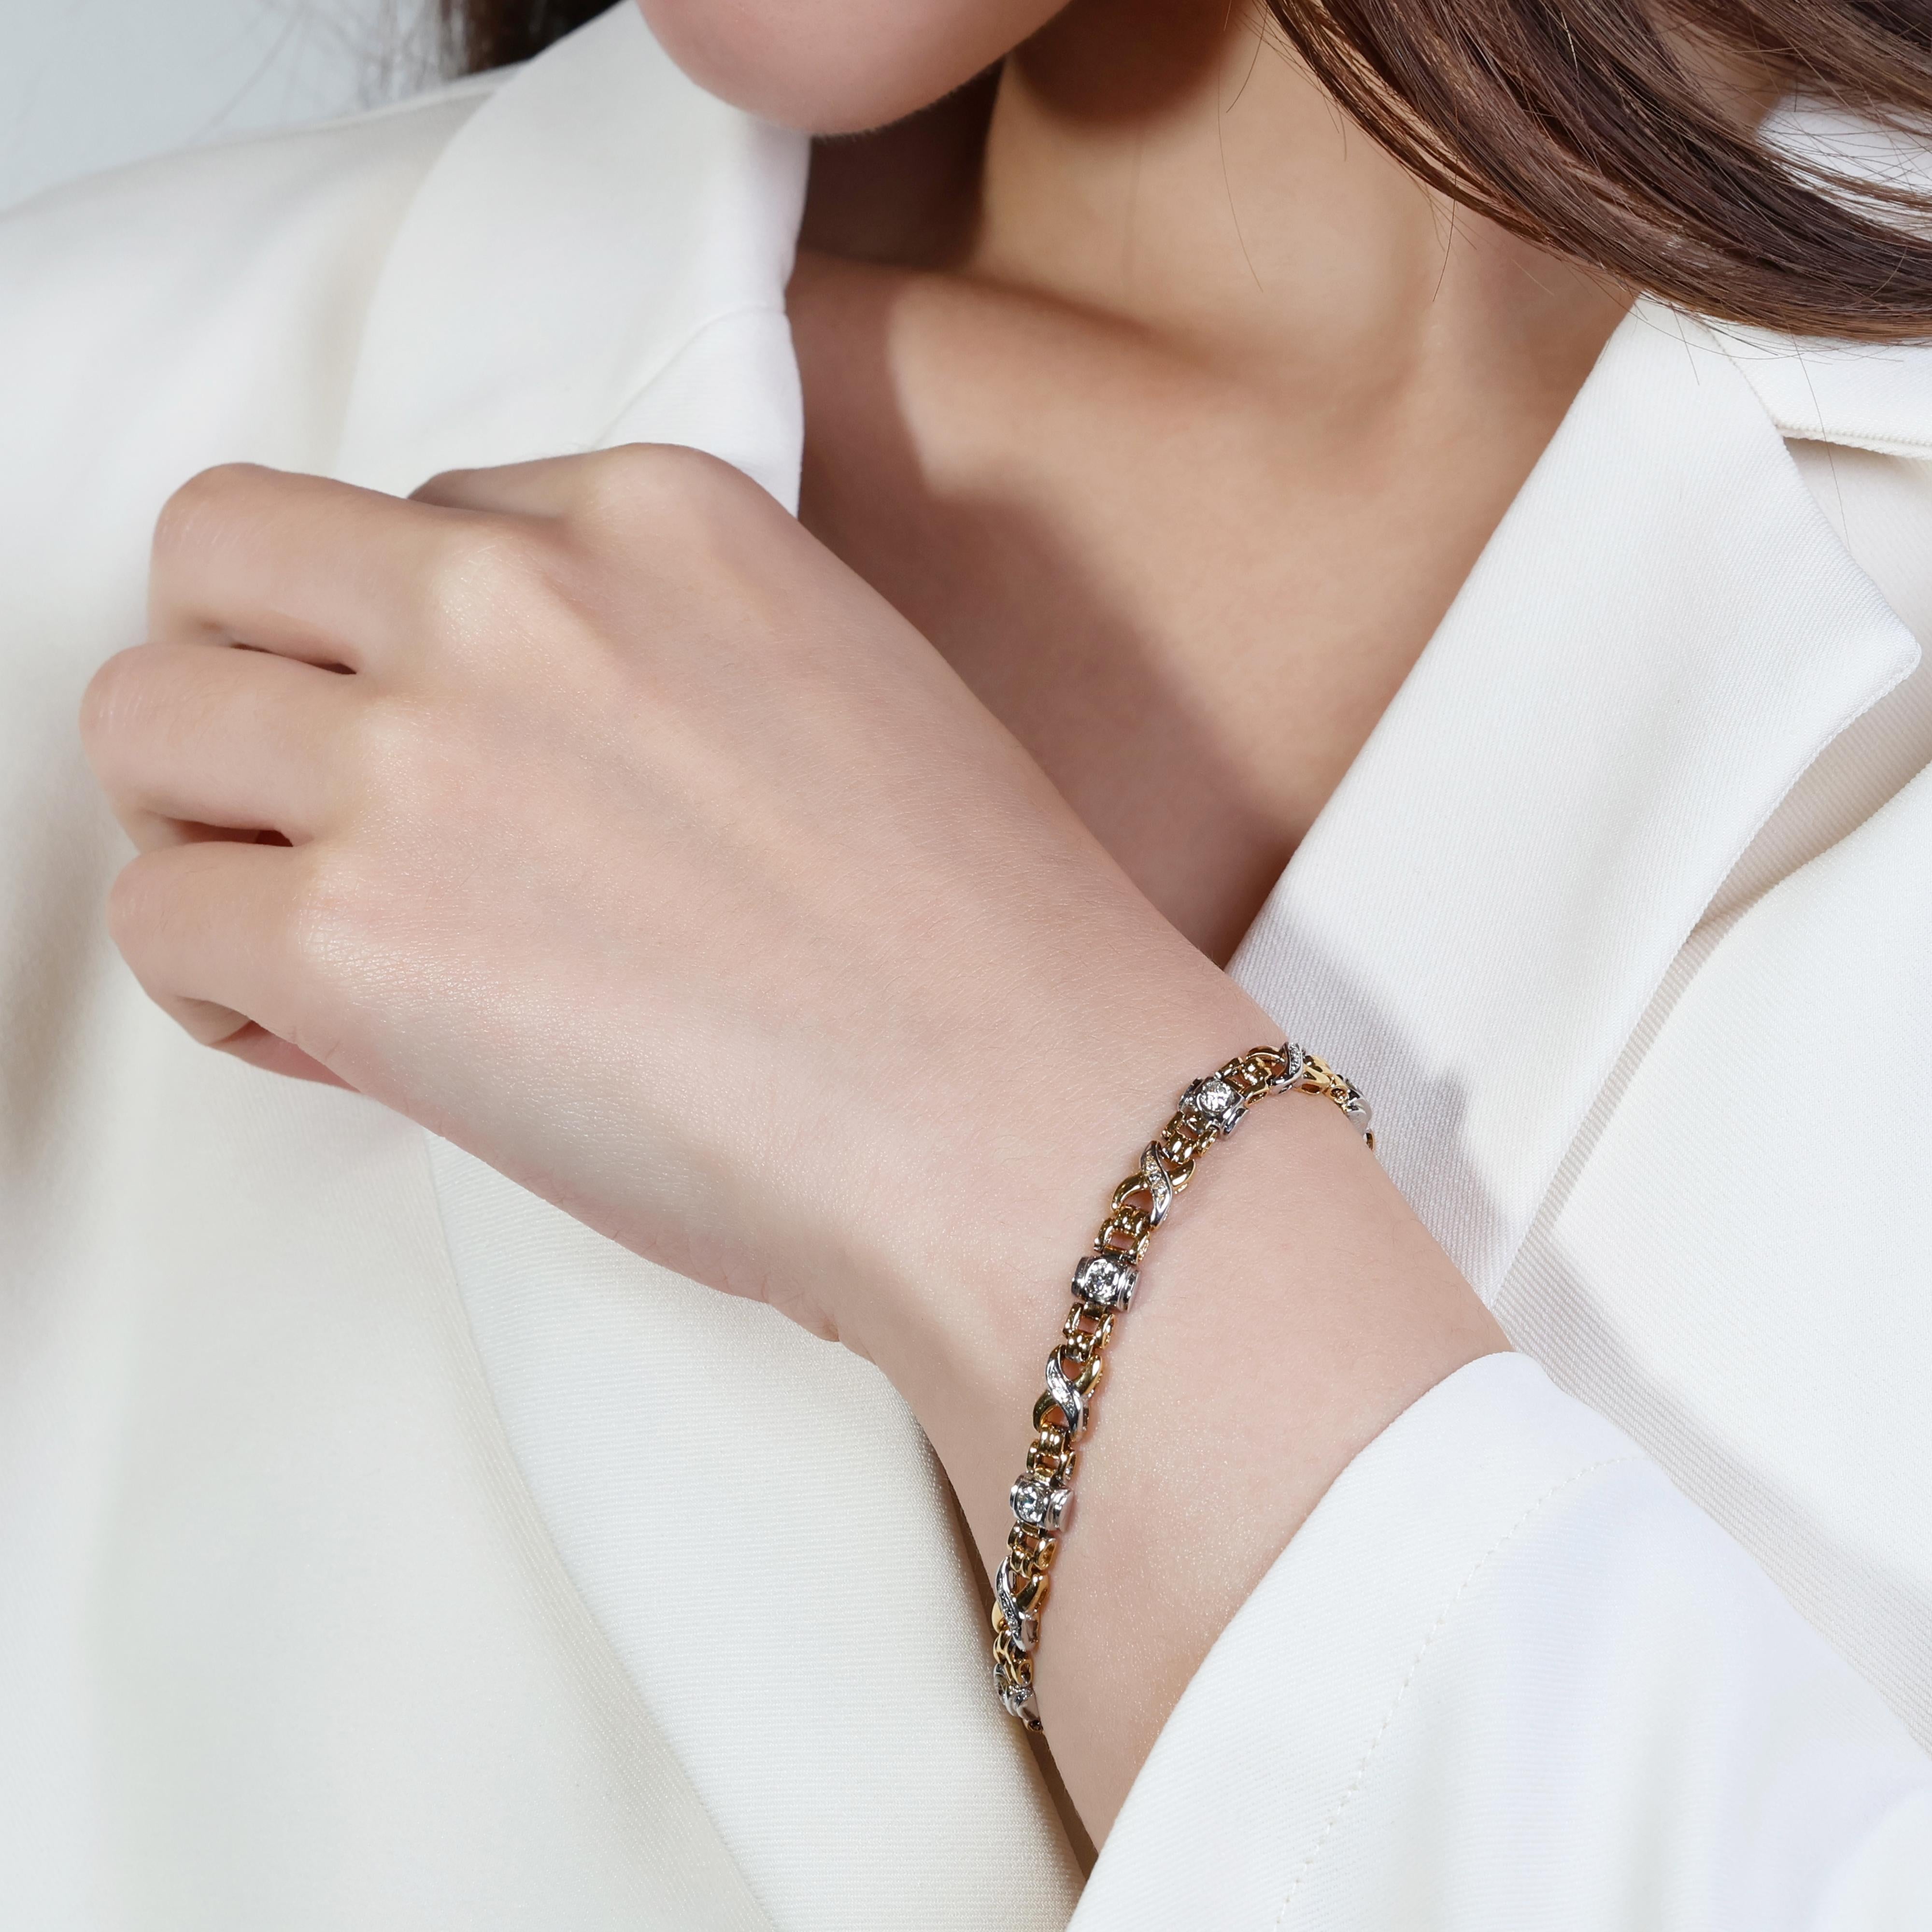 This stunning 18K white and yellow gold bracelet showcases a captivating display of brilliance, featuring a total of 29 round brilliant diamonds for a mesmerizing sparkle. The centerpiece comprises 8 exquisite diamonds boasting a total carat weight